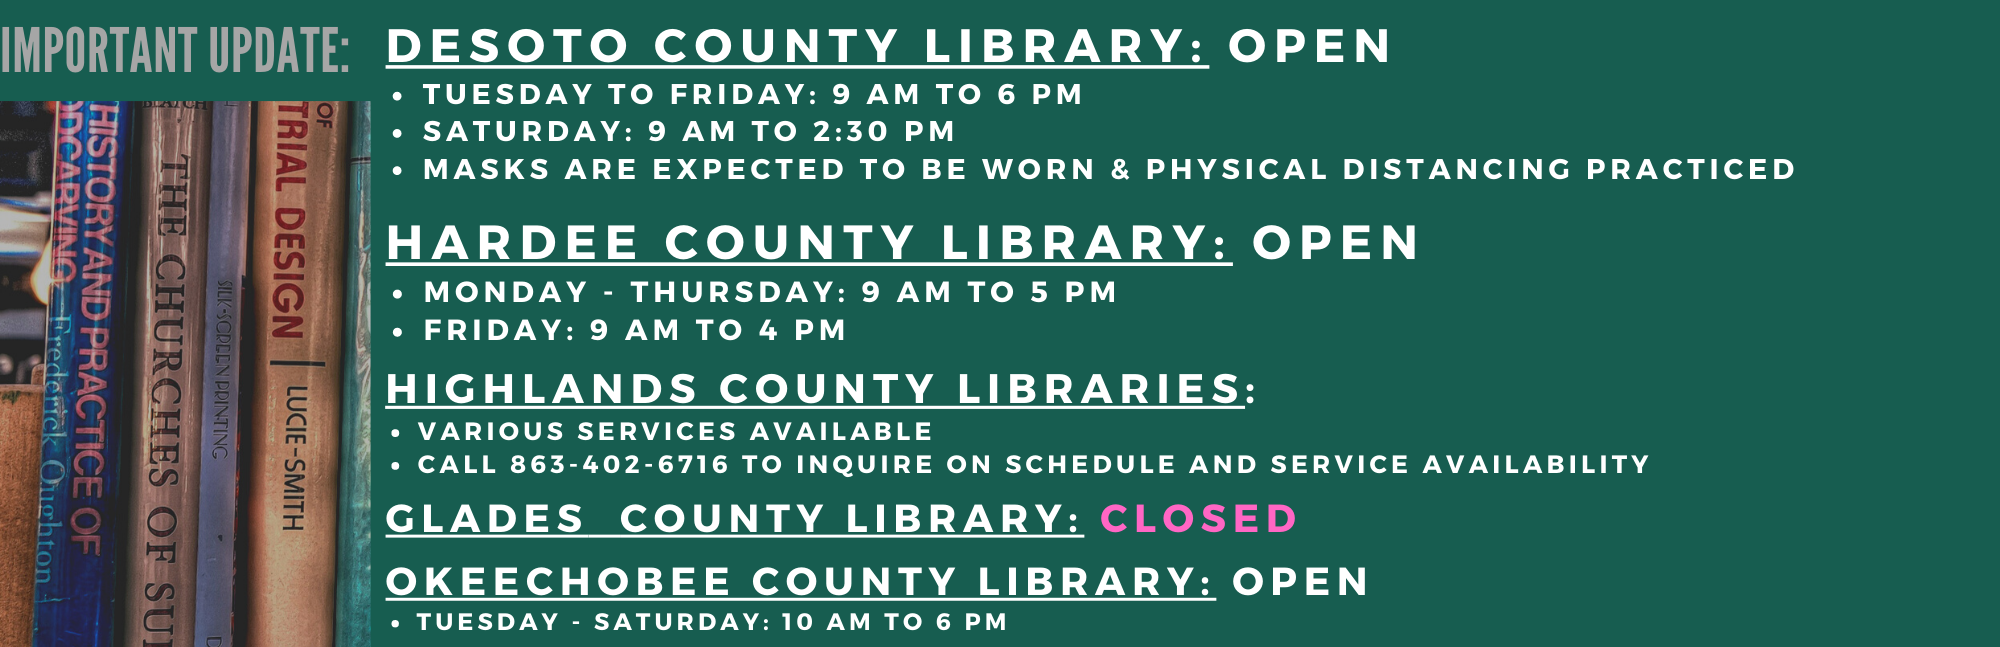 Here is an updated hours for Heartland Library Cooperative libraries.  DeSoto: Tuesday - Friday: 9 AM to 6 PM and Saturday: 9:00 AM to 2:30 PM Hardee: Monday - Thursday: 9 AM to 5 PM and Friday: 9 AM to 4 PM Highlands: Various services available. Please call 863-402-6716 for service availability Glades: CLOSED Okeechobee: Tuesday - Saturday: 10 AM to 6 PM For questions, please call your local library for information.